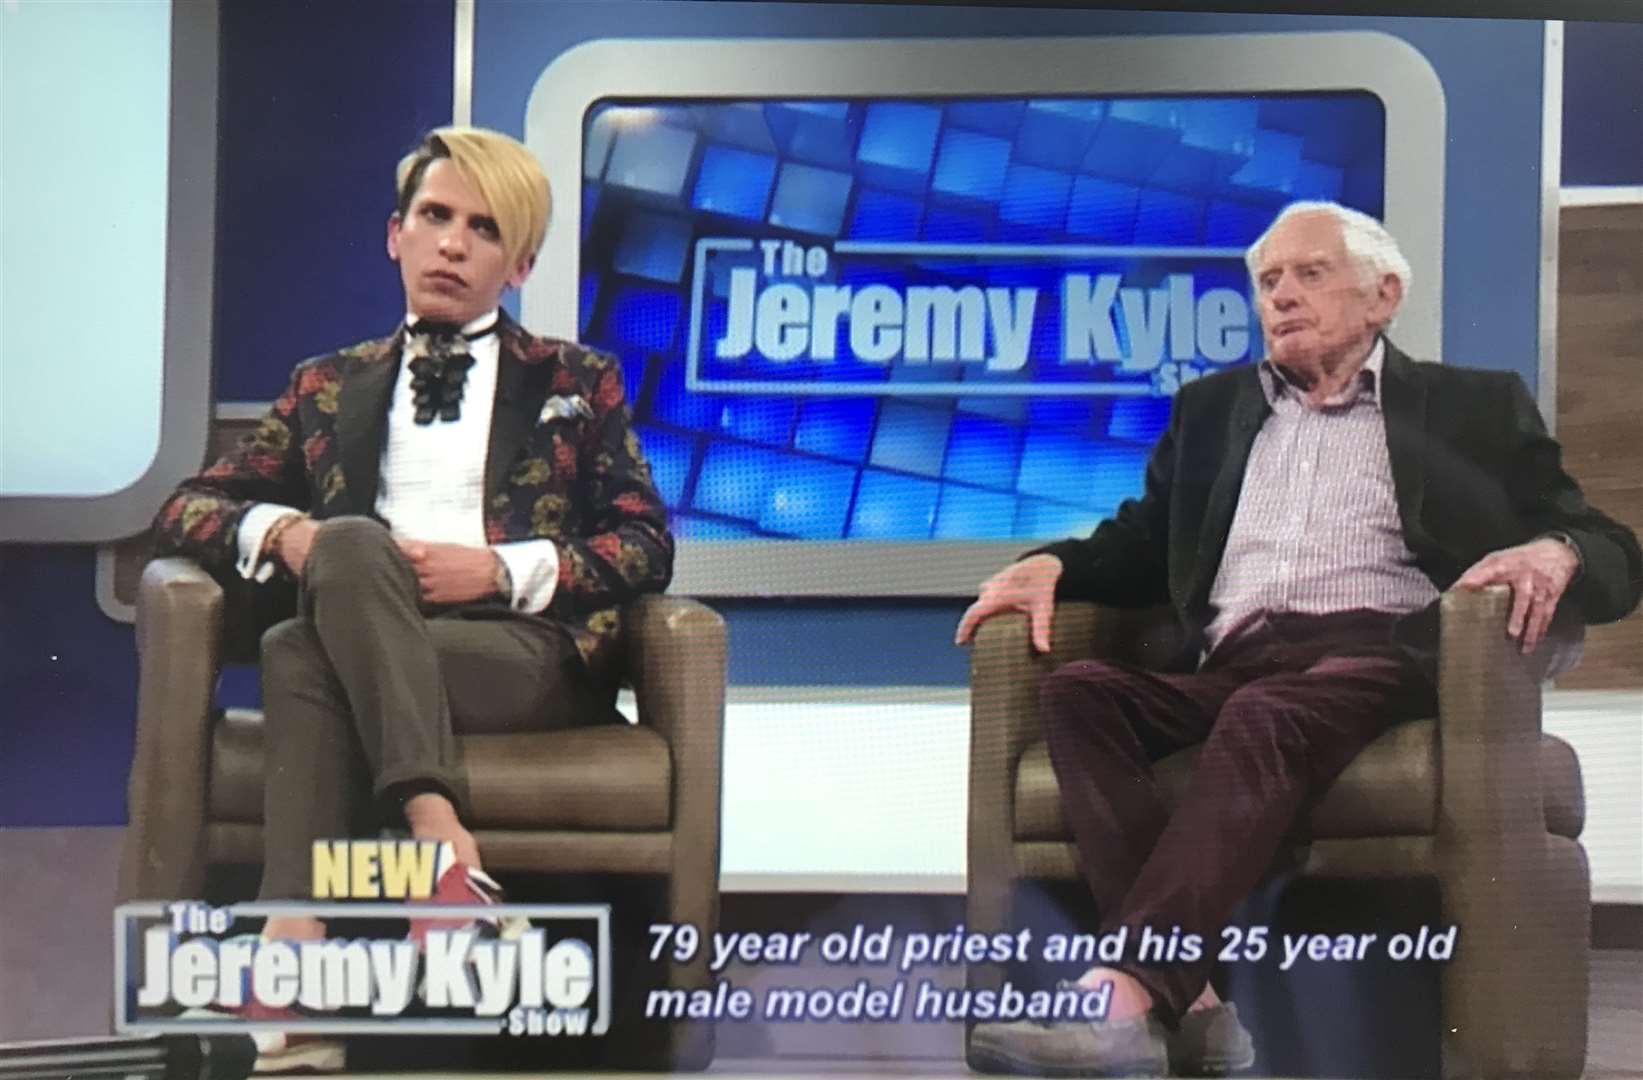 Philip Clements and Florin Marin appeared on The Jeremy Kyle Show. Picture: ITV